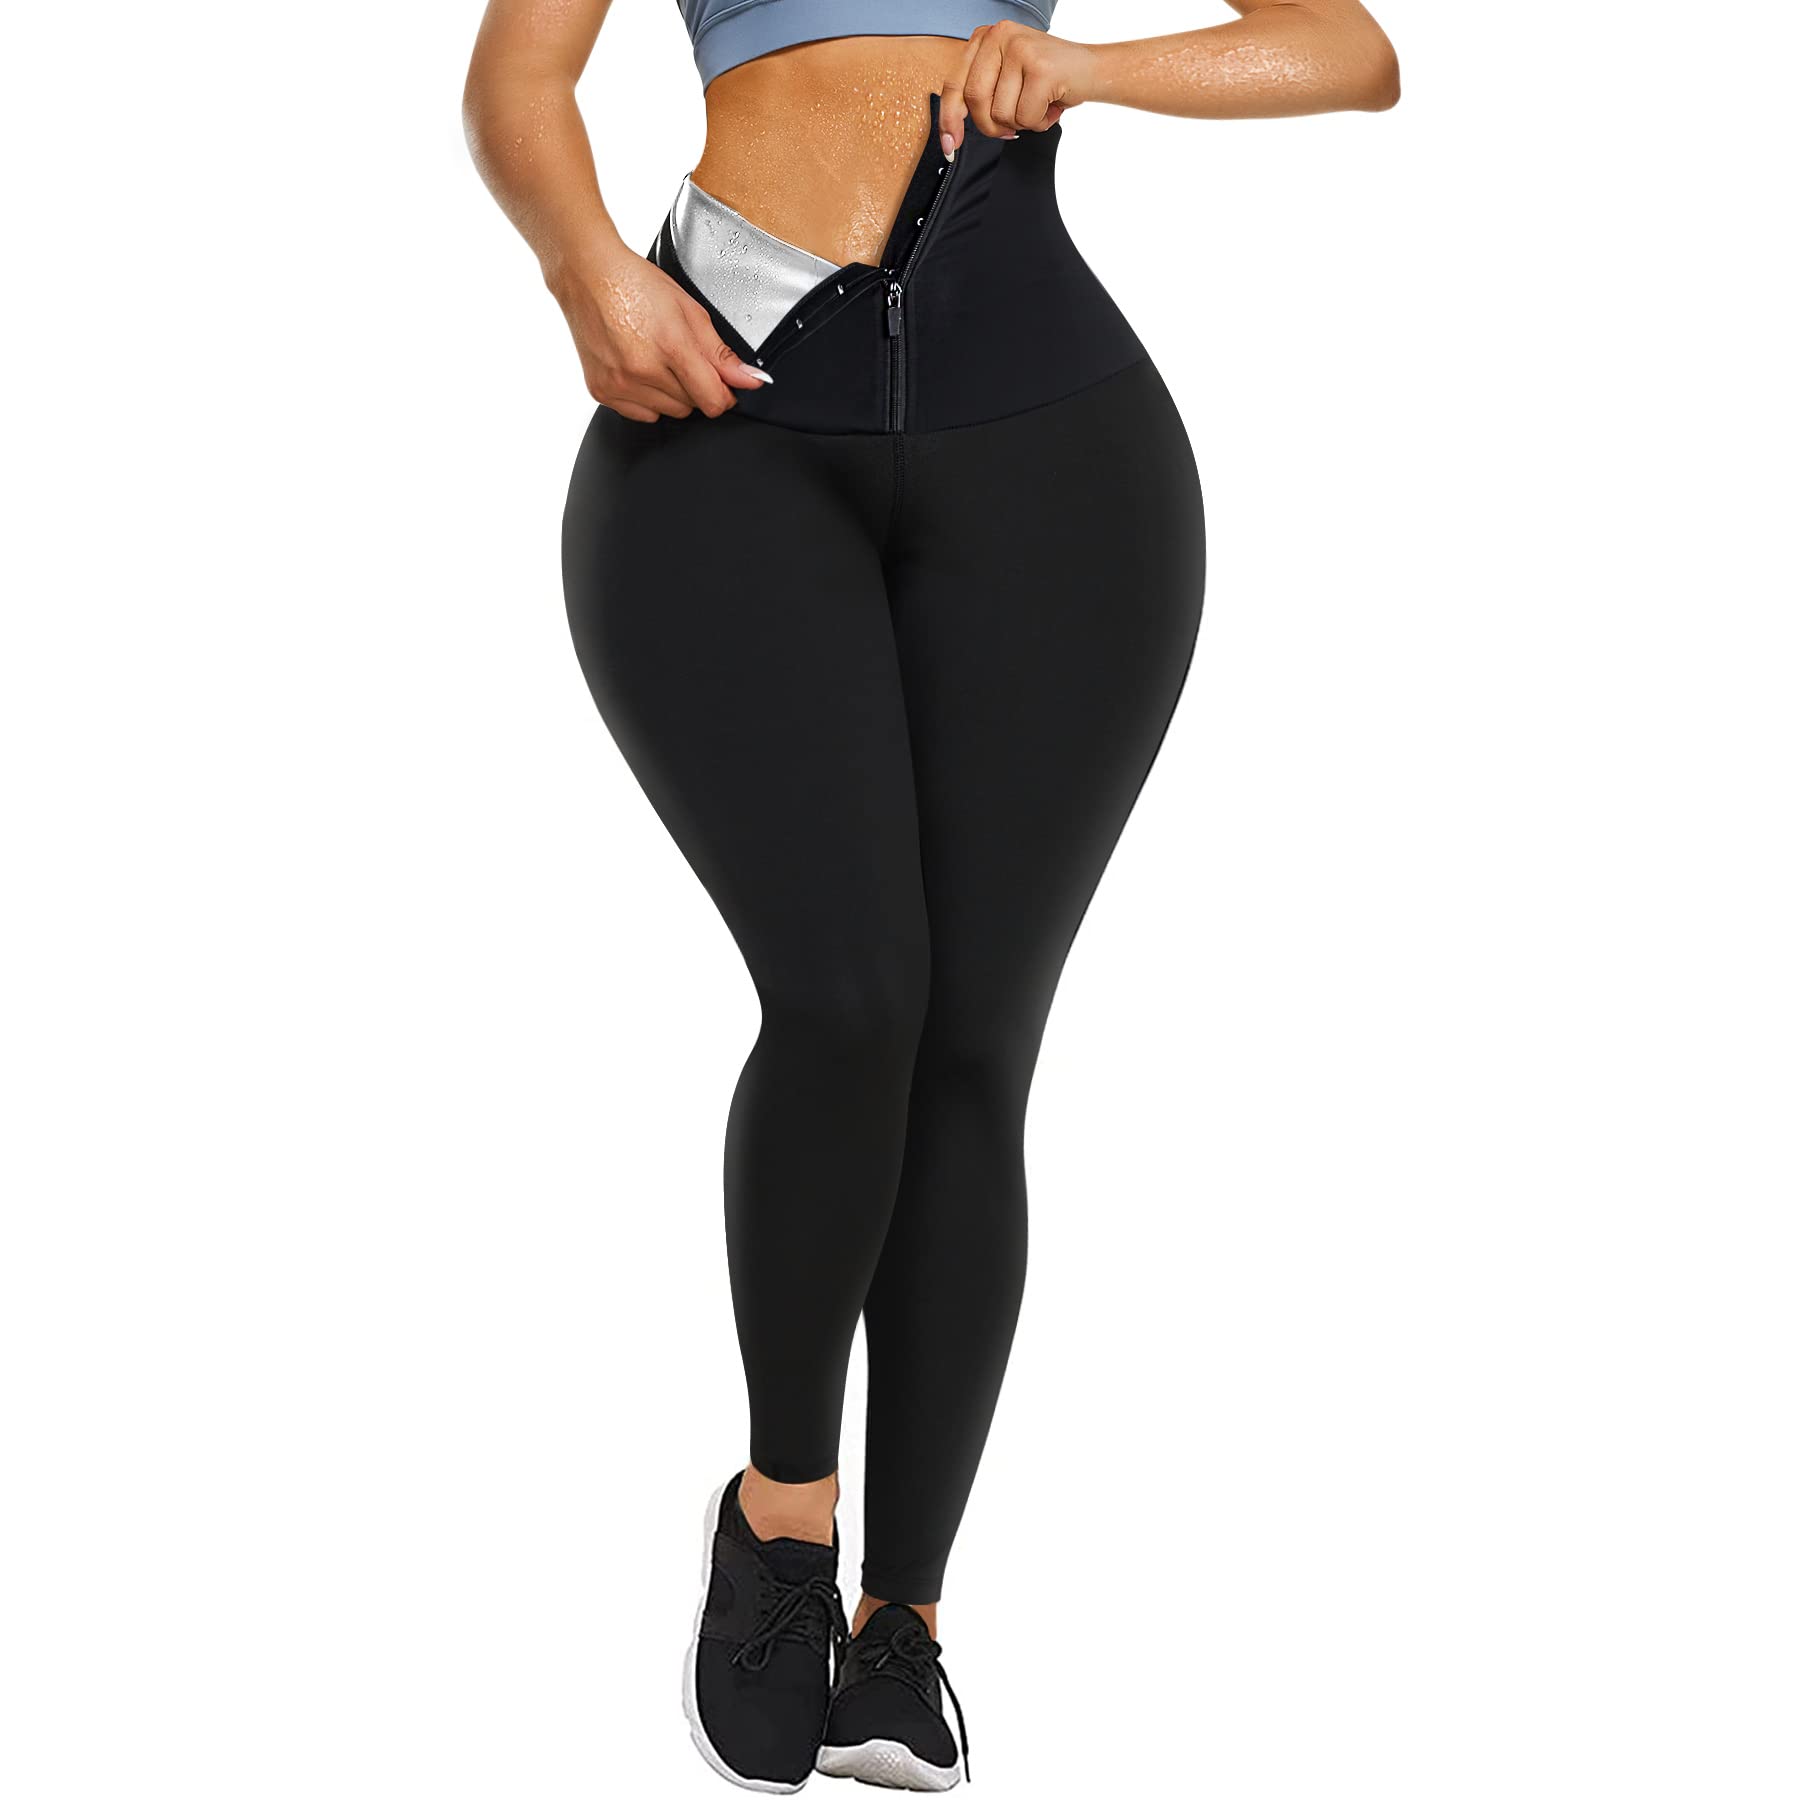 Body Shaper Sauna Pants Sweat Suits For Women High Waist Compression  Slimming Shorts Hot Thermo Wiast Trainer Leggings Workout